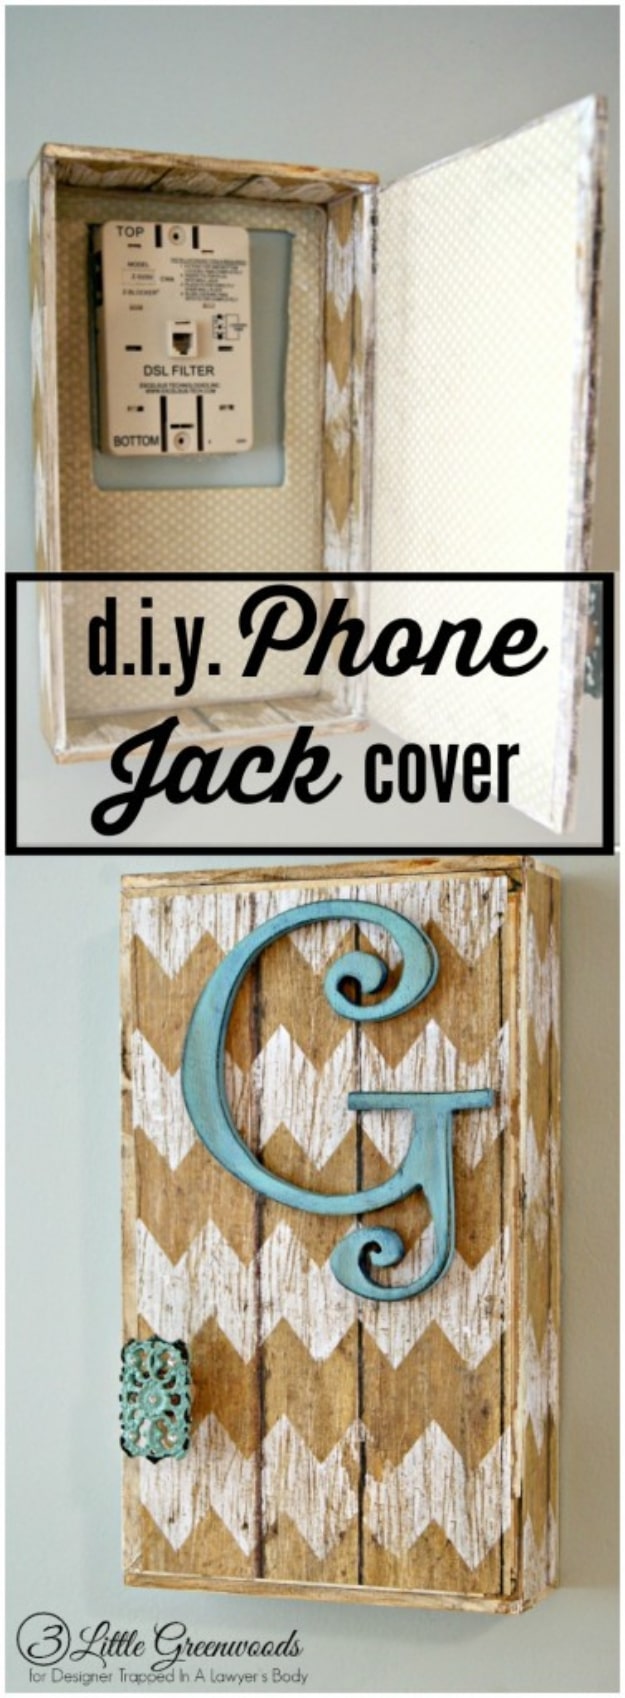 DIY Phone Hacks - DIY Phone Jack Cover - Cool Tips and Tricks for Phones, Headphones and iPhone How To - Make Speakers, Change Settings, Know Secrets You Can Do With Your Phone By Learning This Cool Stuff - DIY Projects and Crafts for Men and Women http://diyjoy.com/diy-iphone-hacks